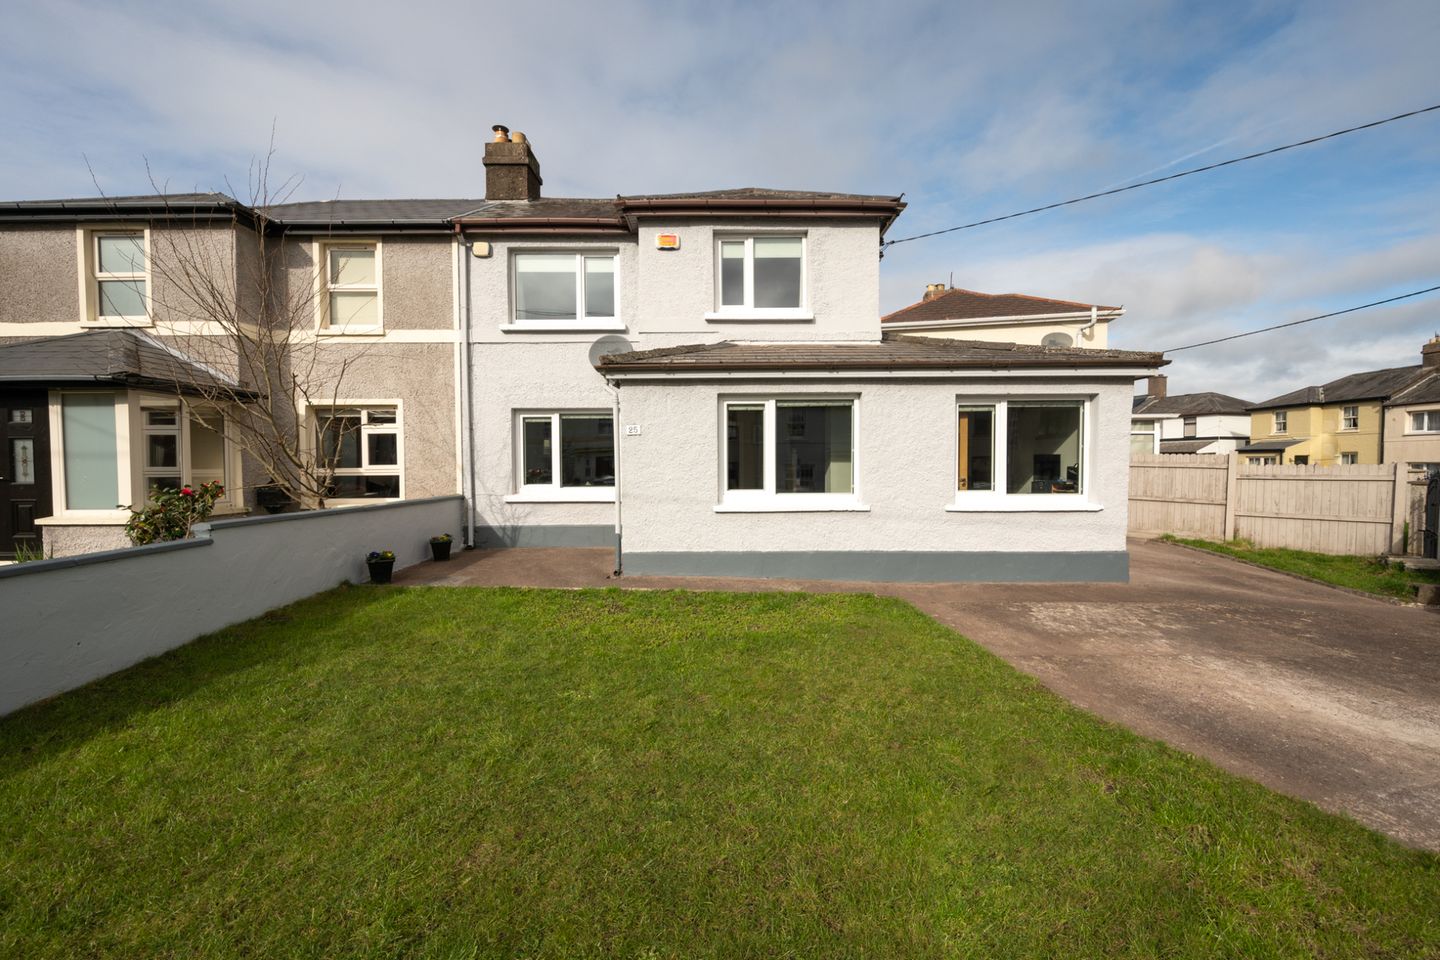 25 O'Connell Crescent, Turners Cross, Co. Cork